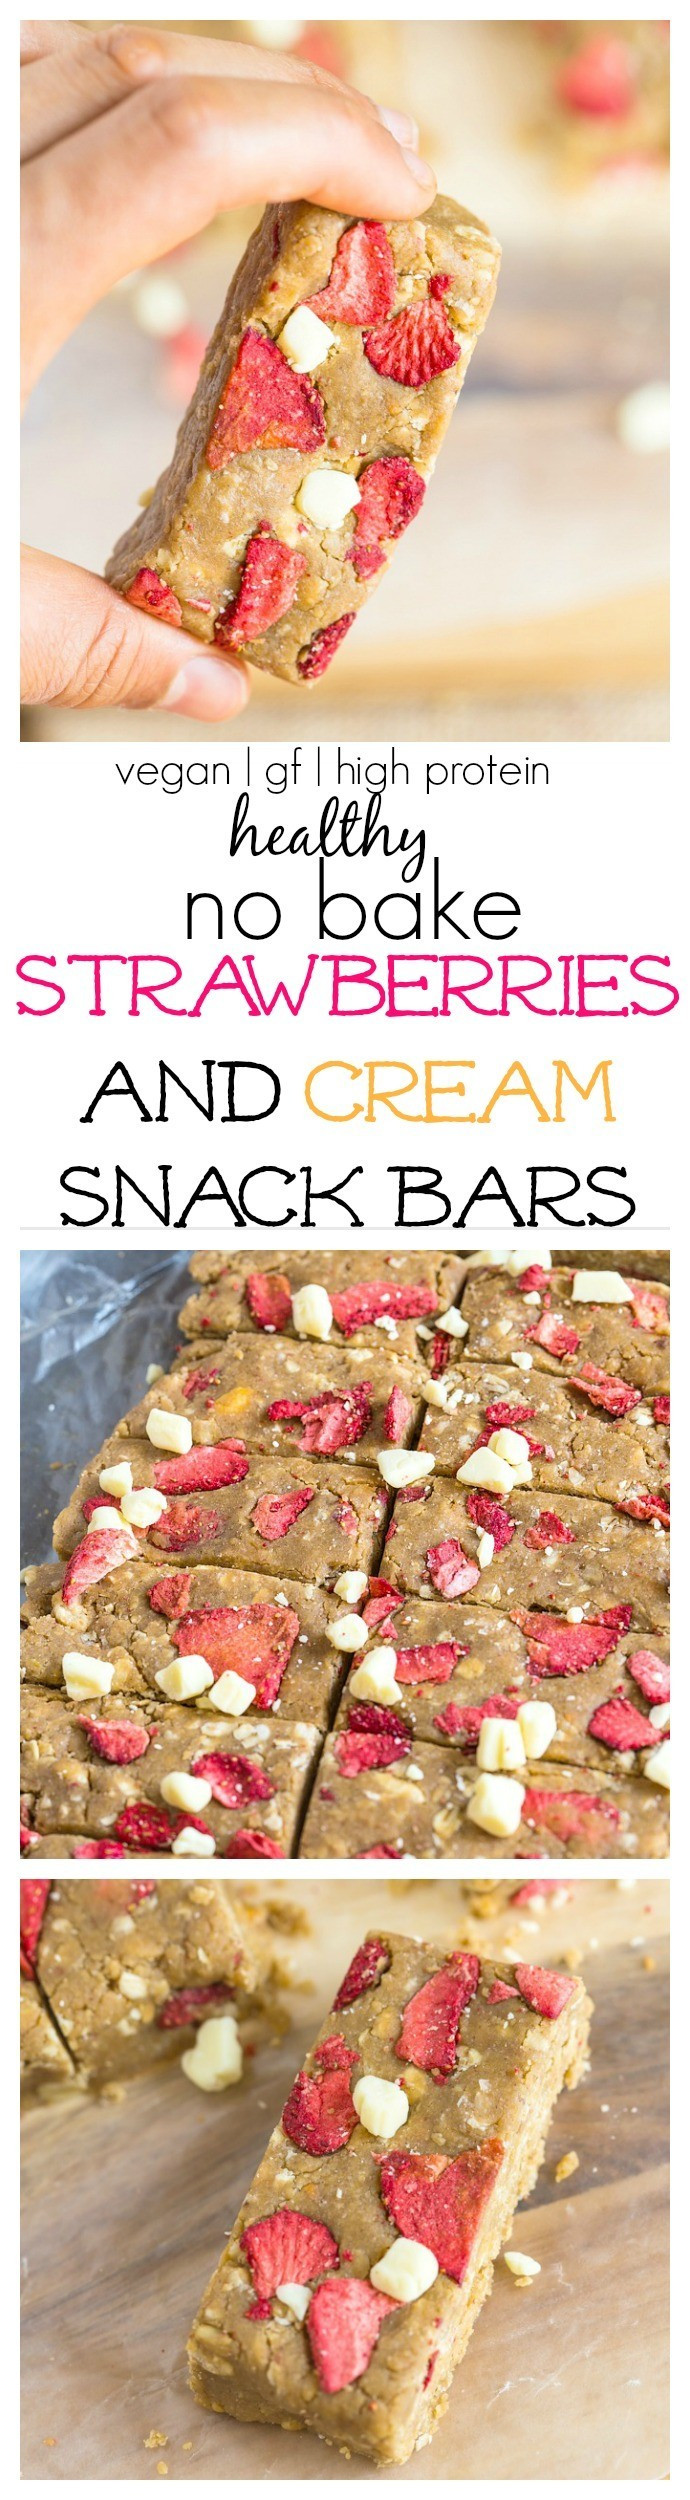 Healthy Strawberry Snacks
 Healthy No Bake Strawberries and Cream Snack Bars